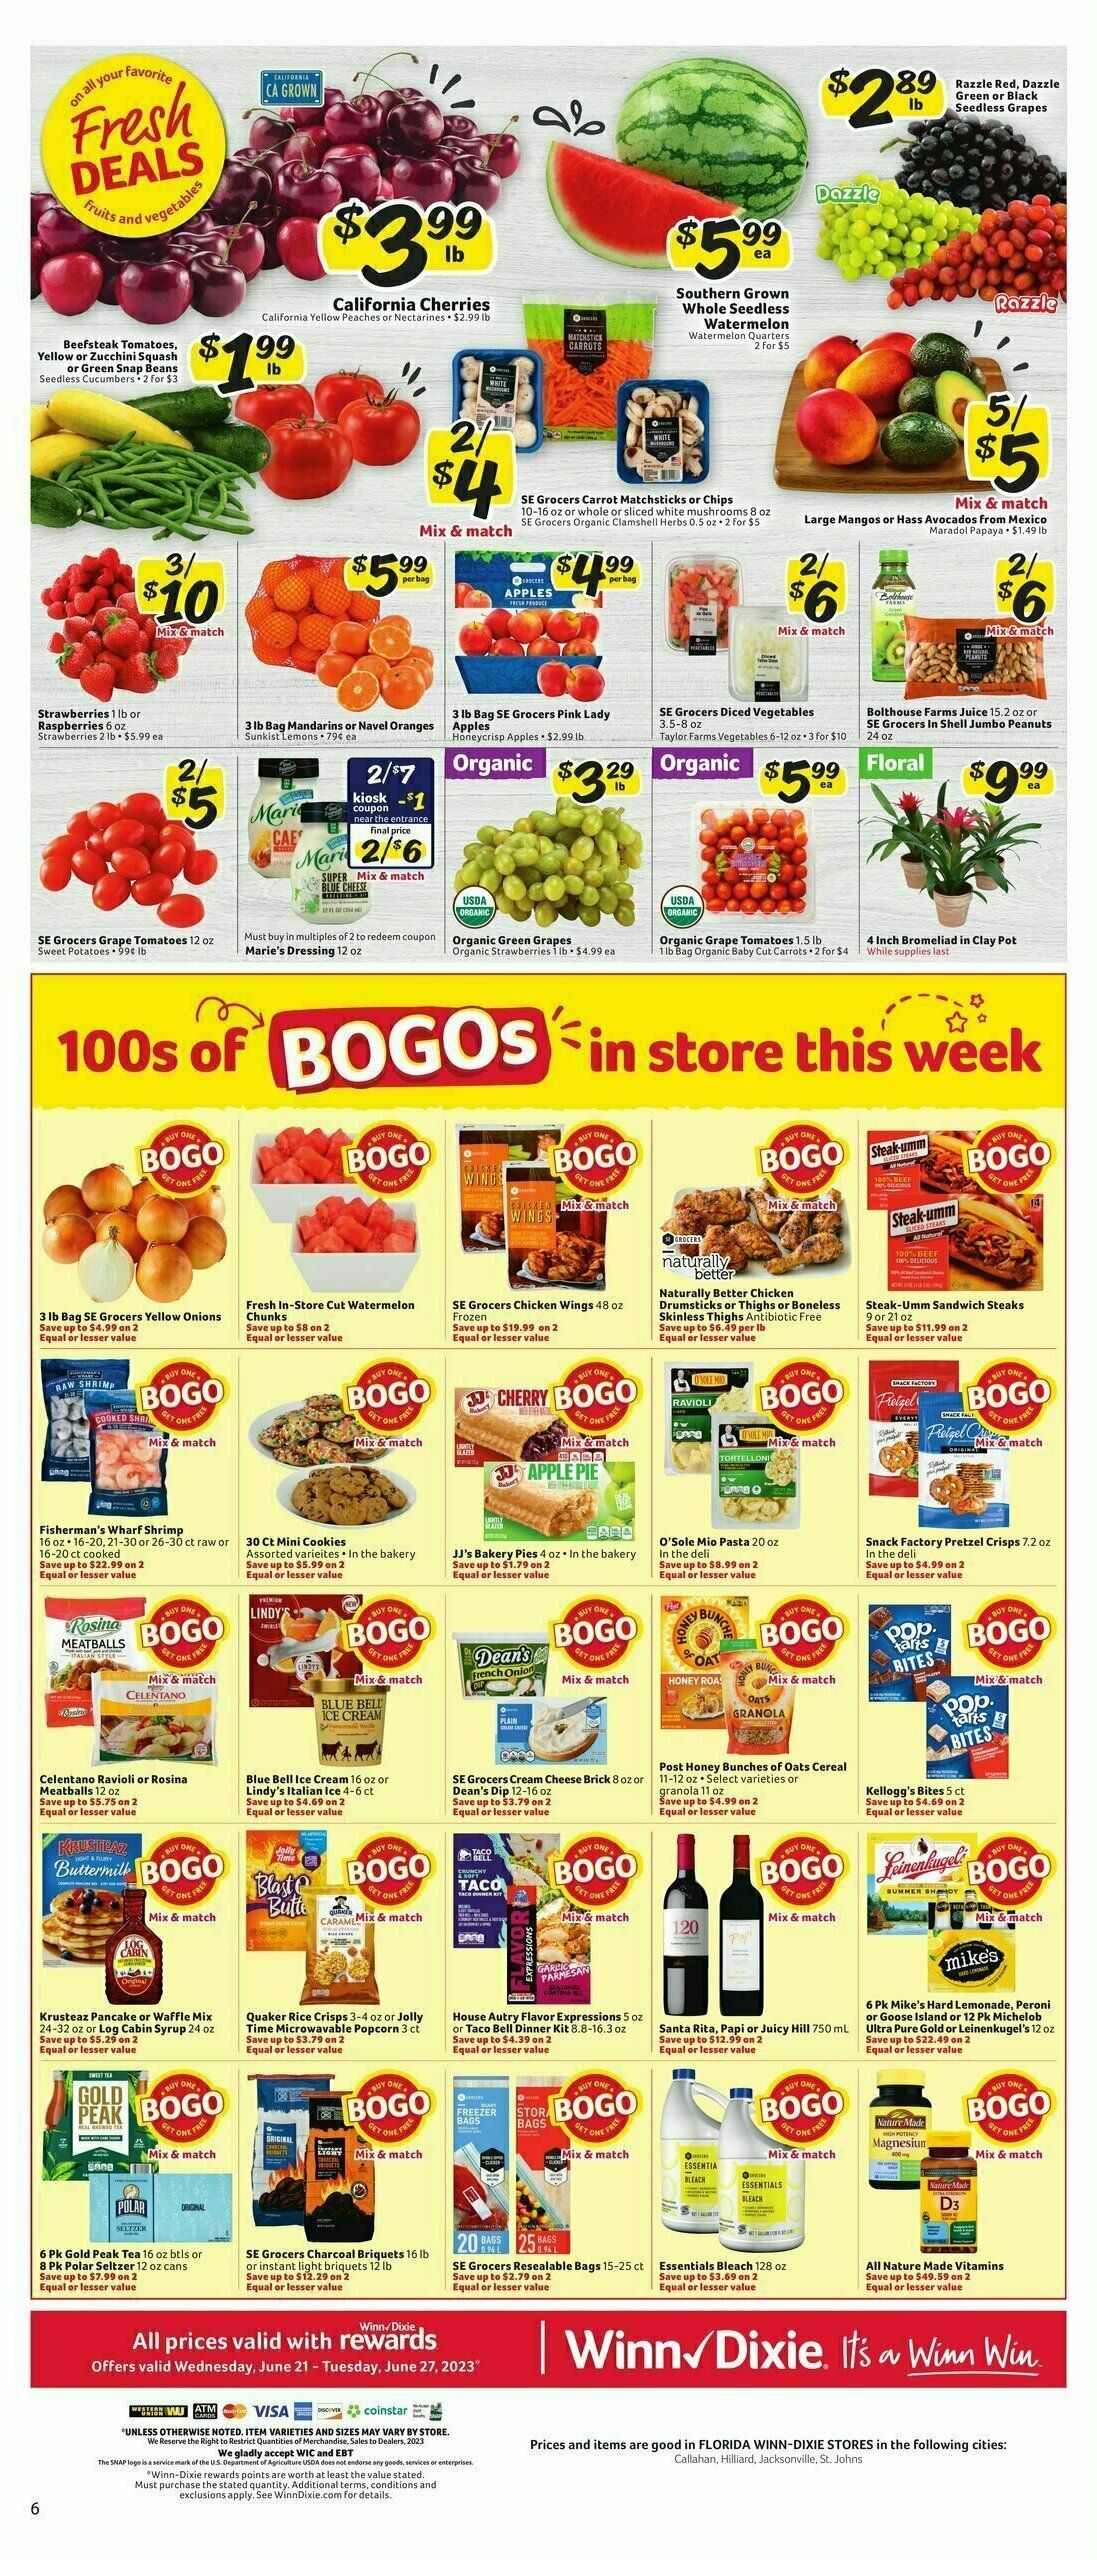 Winn-Dixie Weekly Ad Weekly Ad from June 21